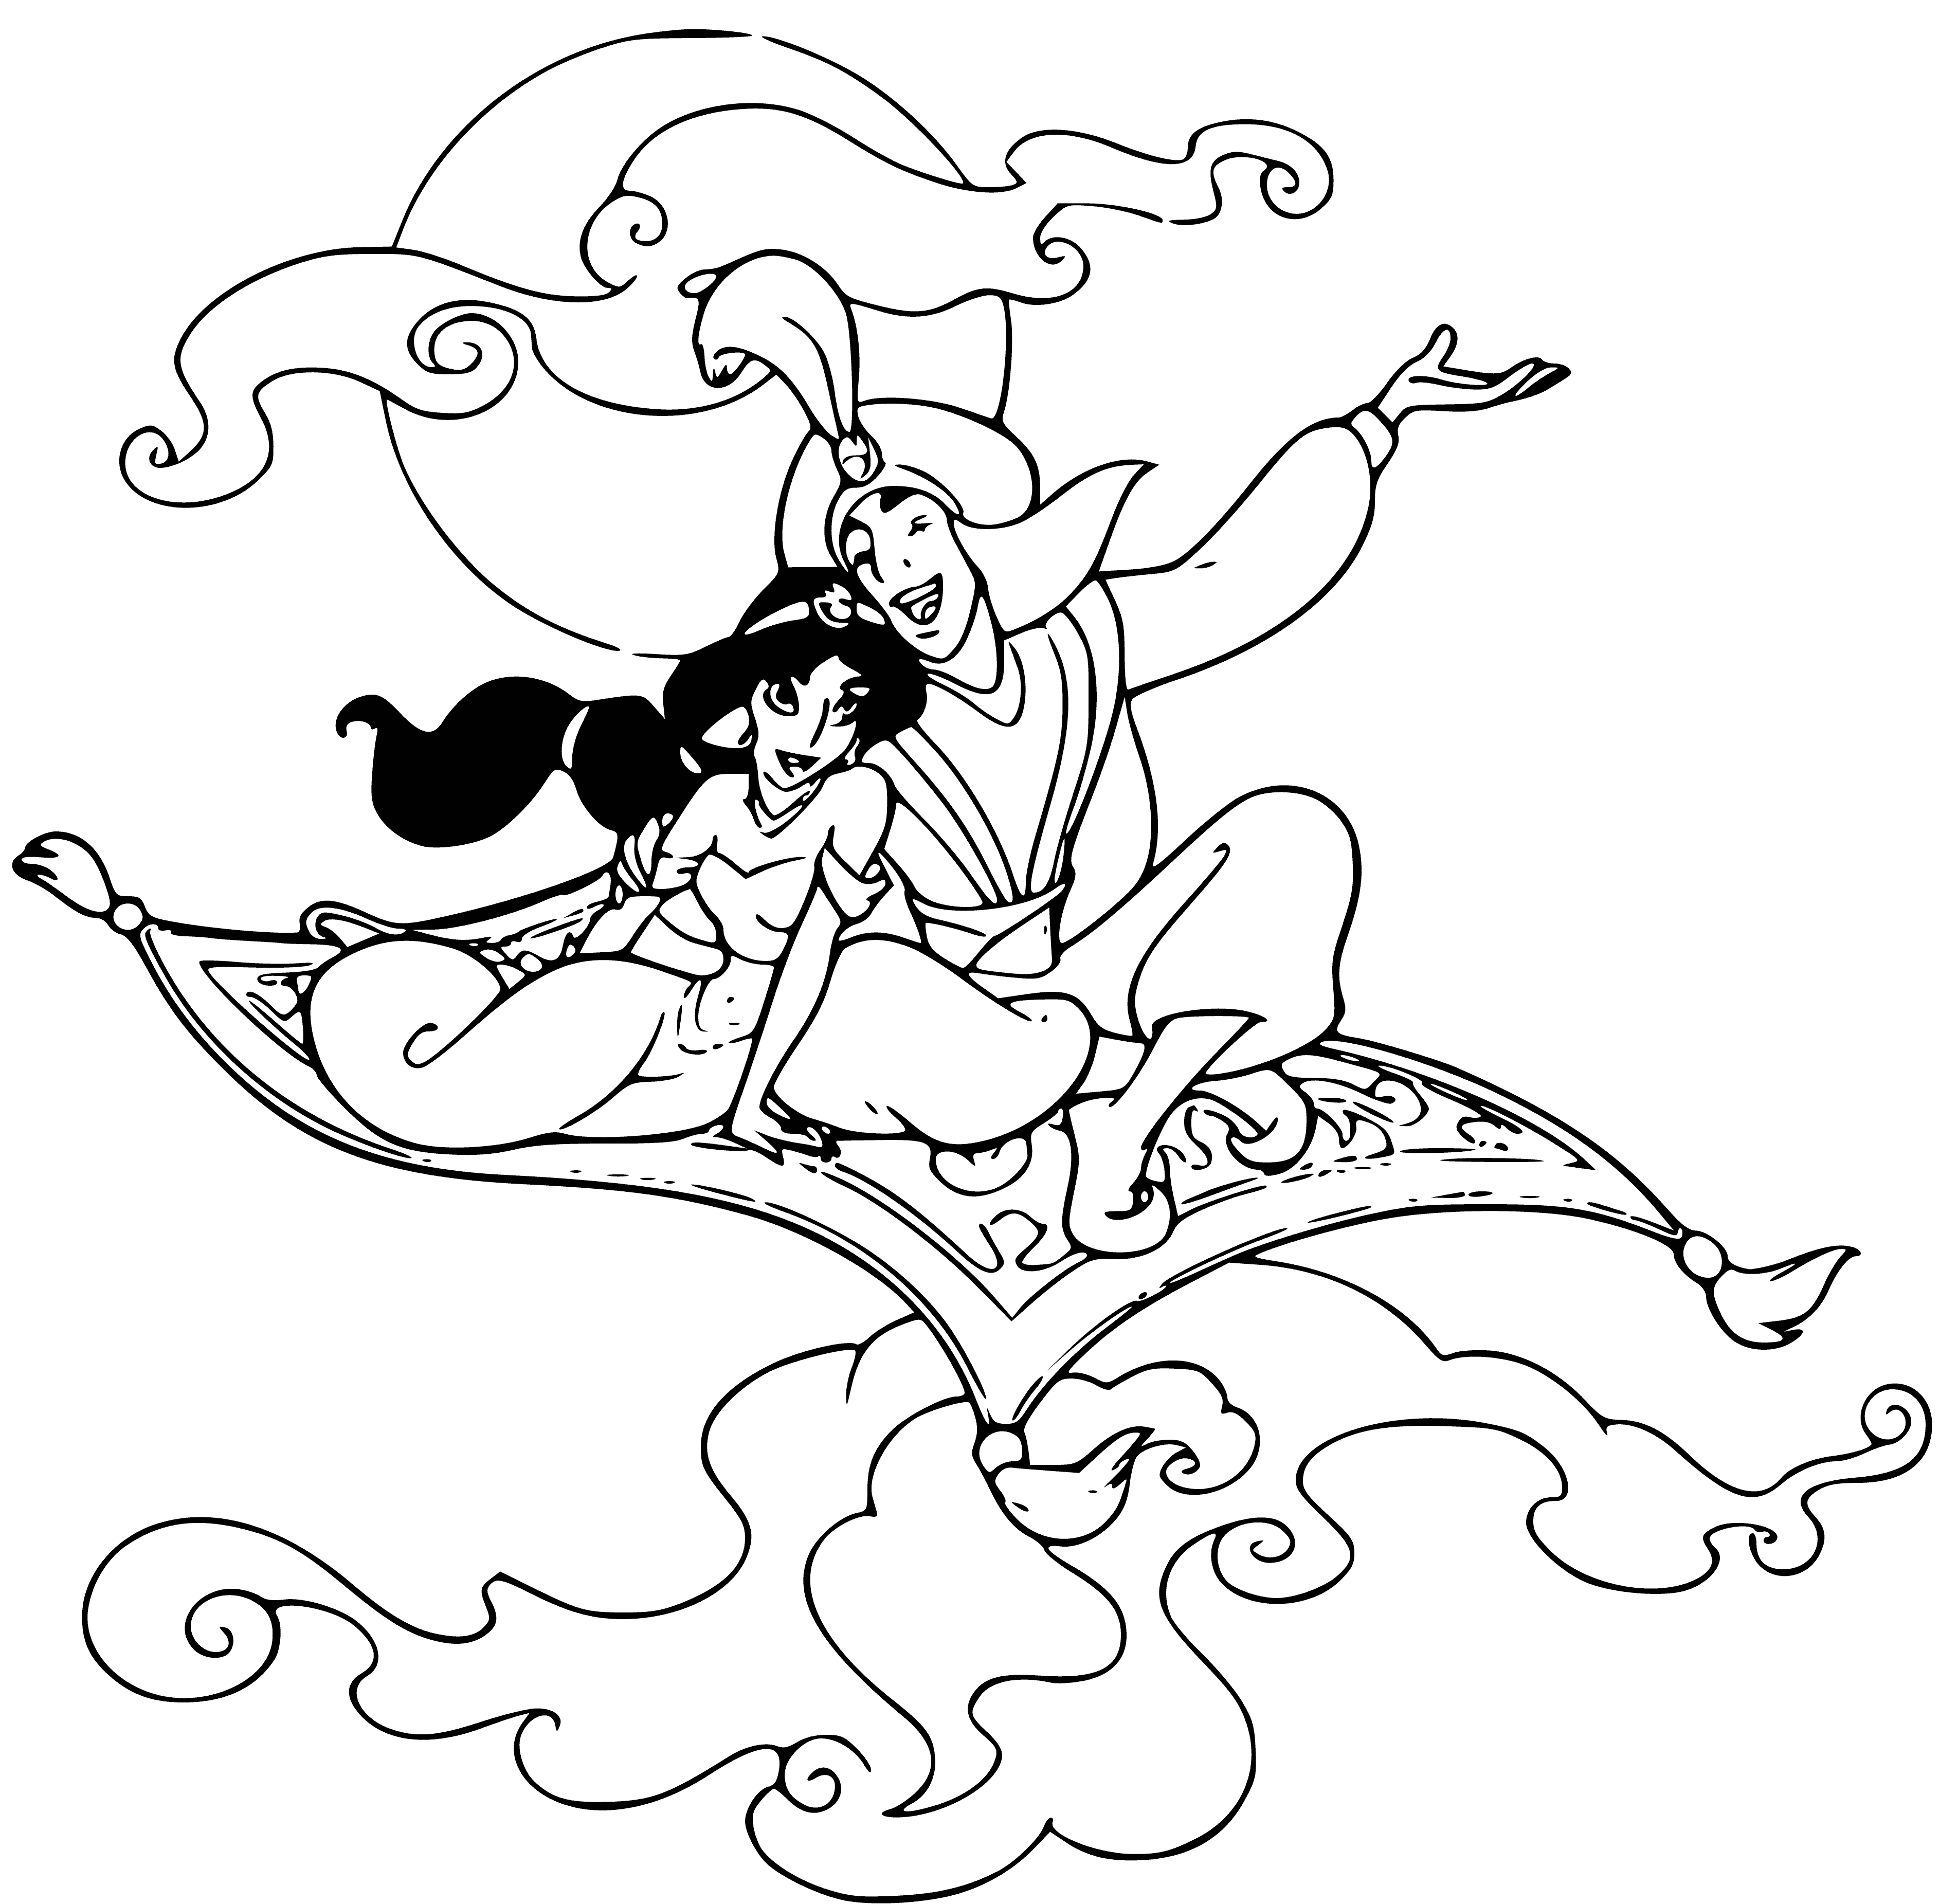 coloring page: Aladdin flies on a carpet plane over a cityscape with a lake, wearing purple and a white headscarf, brandishing a sword.